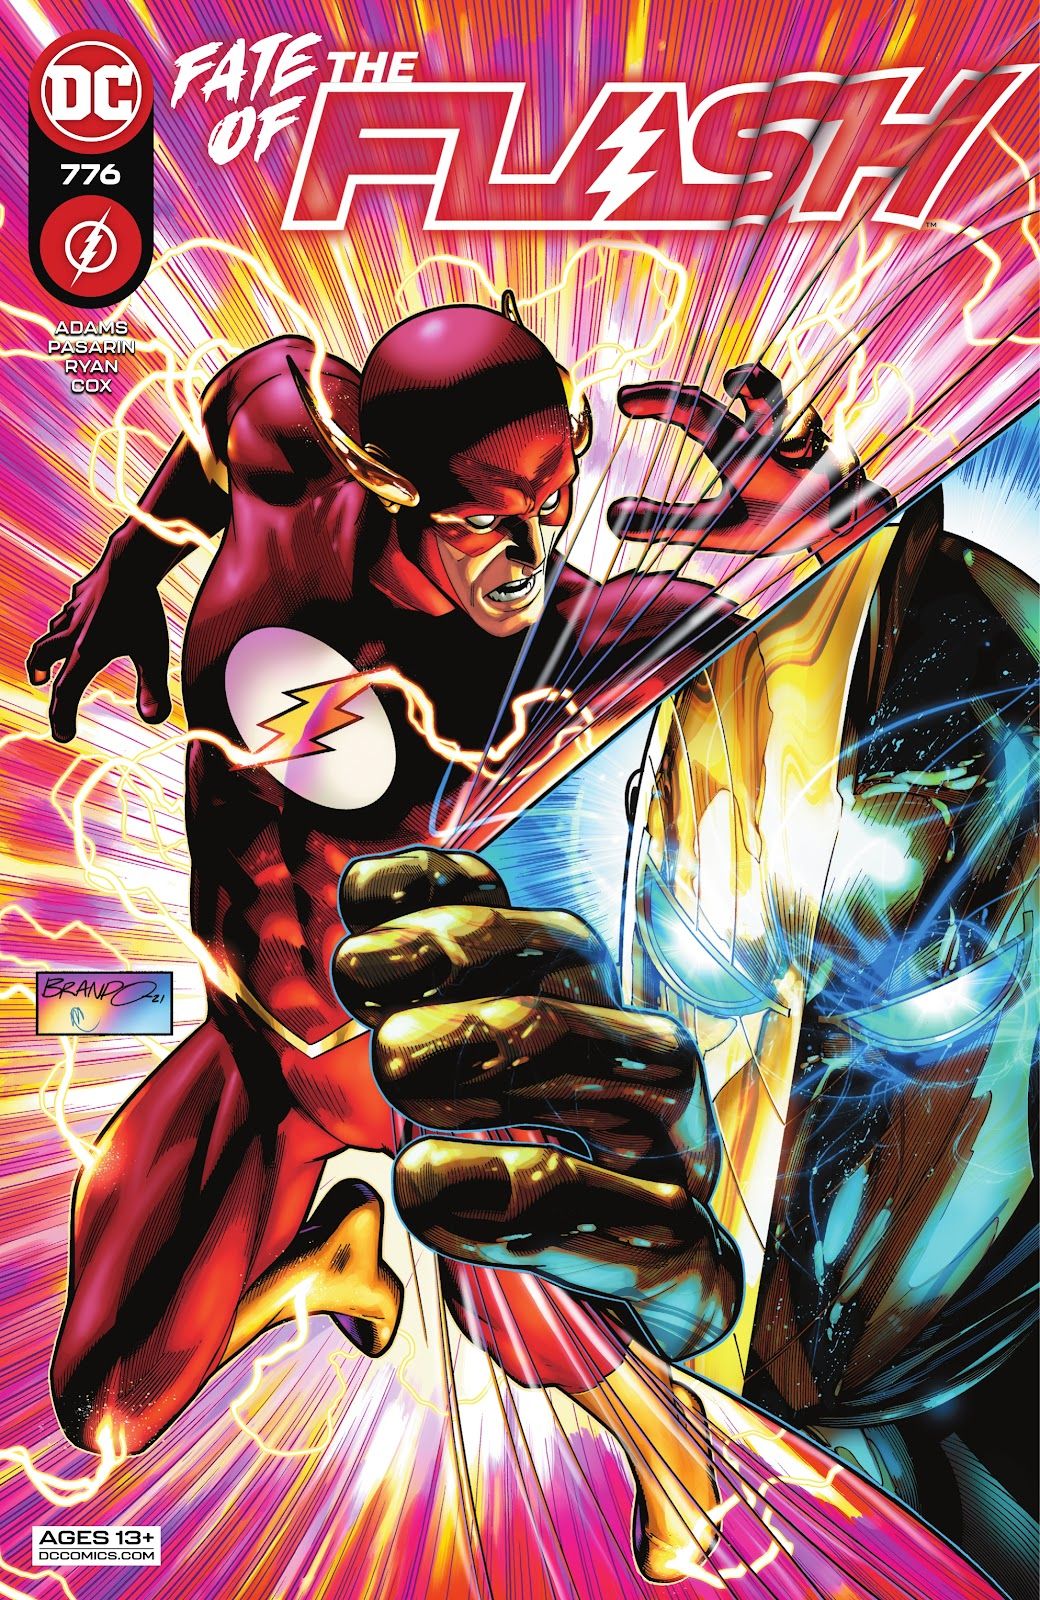 Cover of The Flash #776